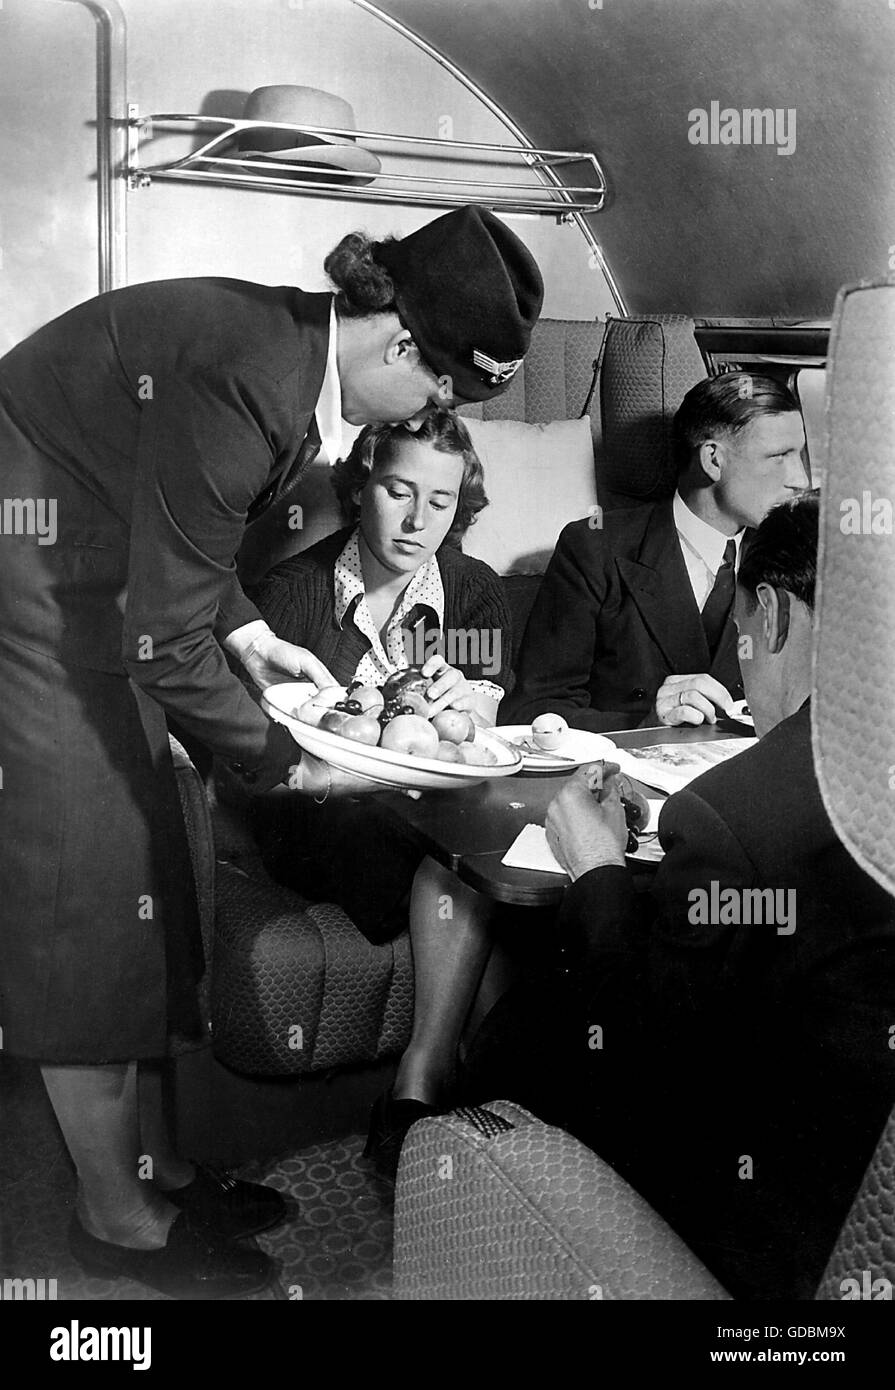 transport / transportation,aviation,airplanes,interior,Junkers Ju 90 of the Lufthansa,board service,stewardess serving fruit,1930s,30s,20th century,historic,historical,stewardess,air hostess,stewardesses,air hostesses,flight attendant,fruit,fruits,food,eat,eating,eaten,airplane,aeroplane,plane,airplanes,aeroplanes,planes,comfort,service,services,air passenger,air passengers,bumpee,catering,feeding,service,provision of food and drink,board,foods,meals,passengers,passenger,cabin,cabins,interior view,flight,flights,,Additional-Rights-Clearences-Not Available Stock Photo